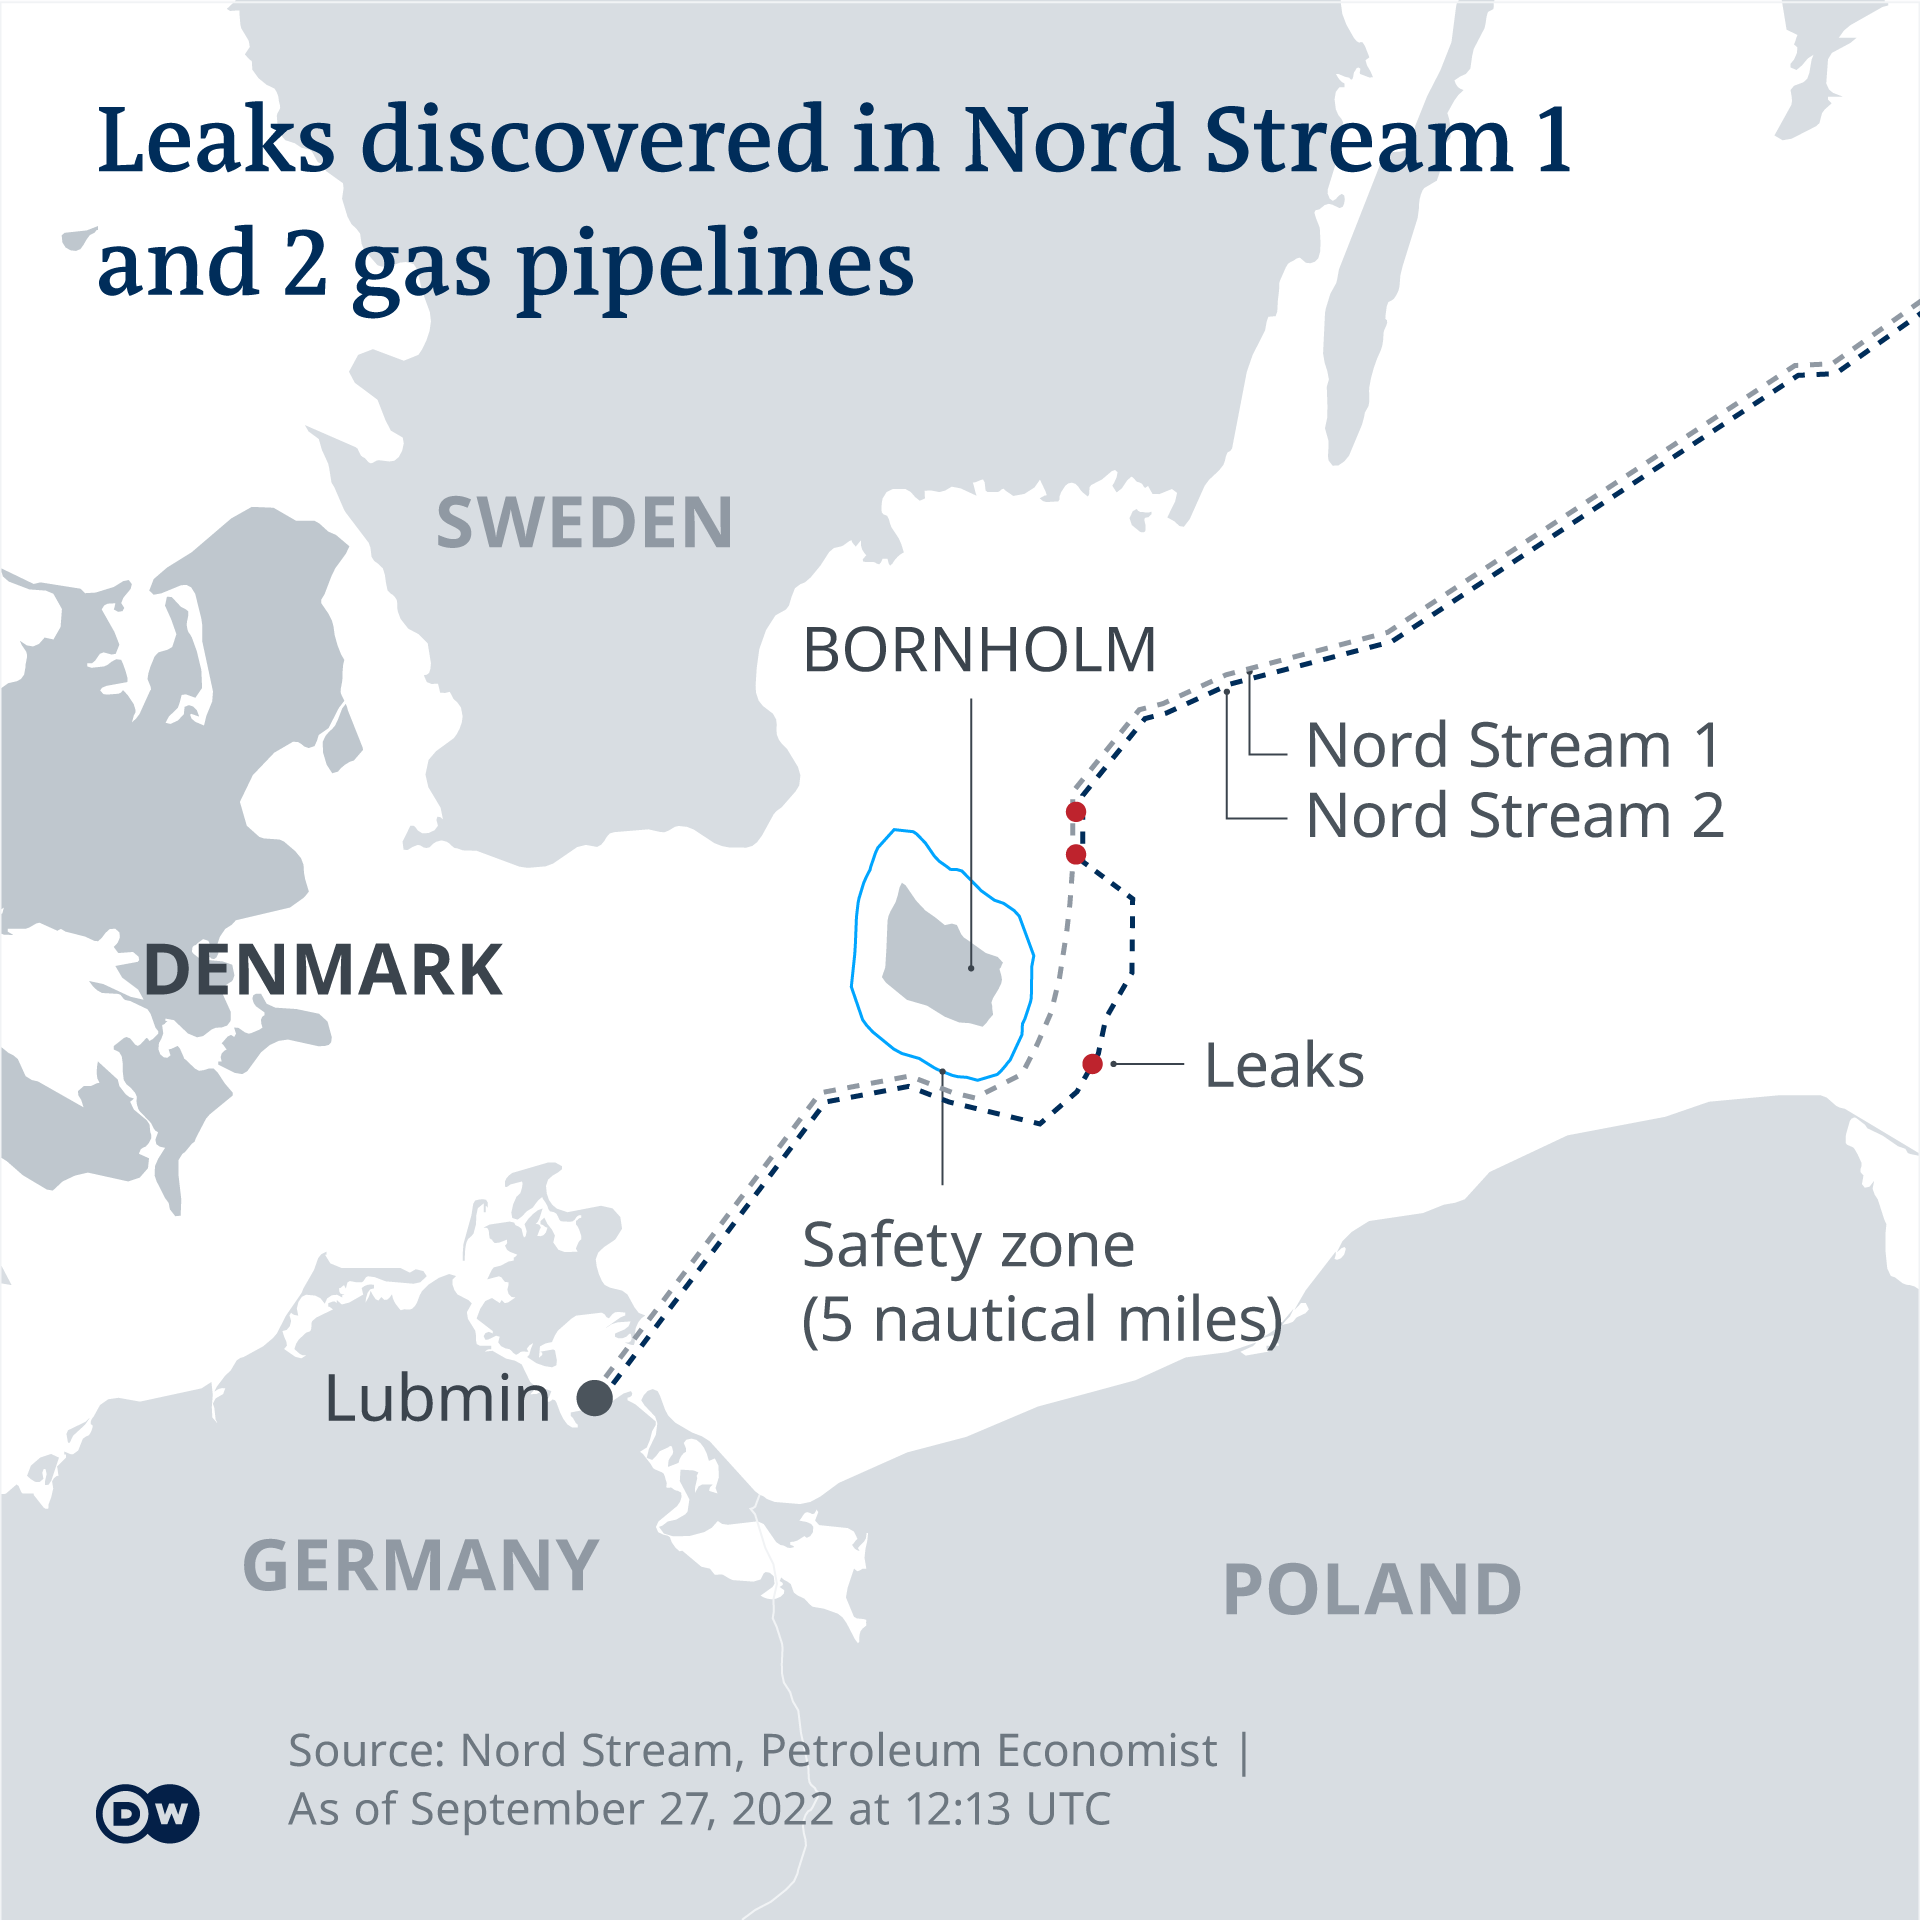 Nord Stream pipeline leaks biggest ever, according to scientists